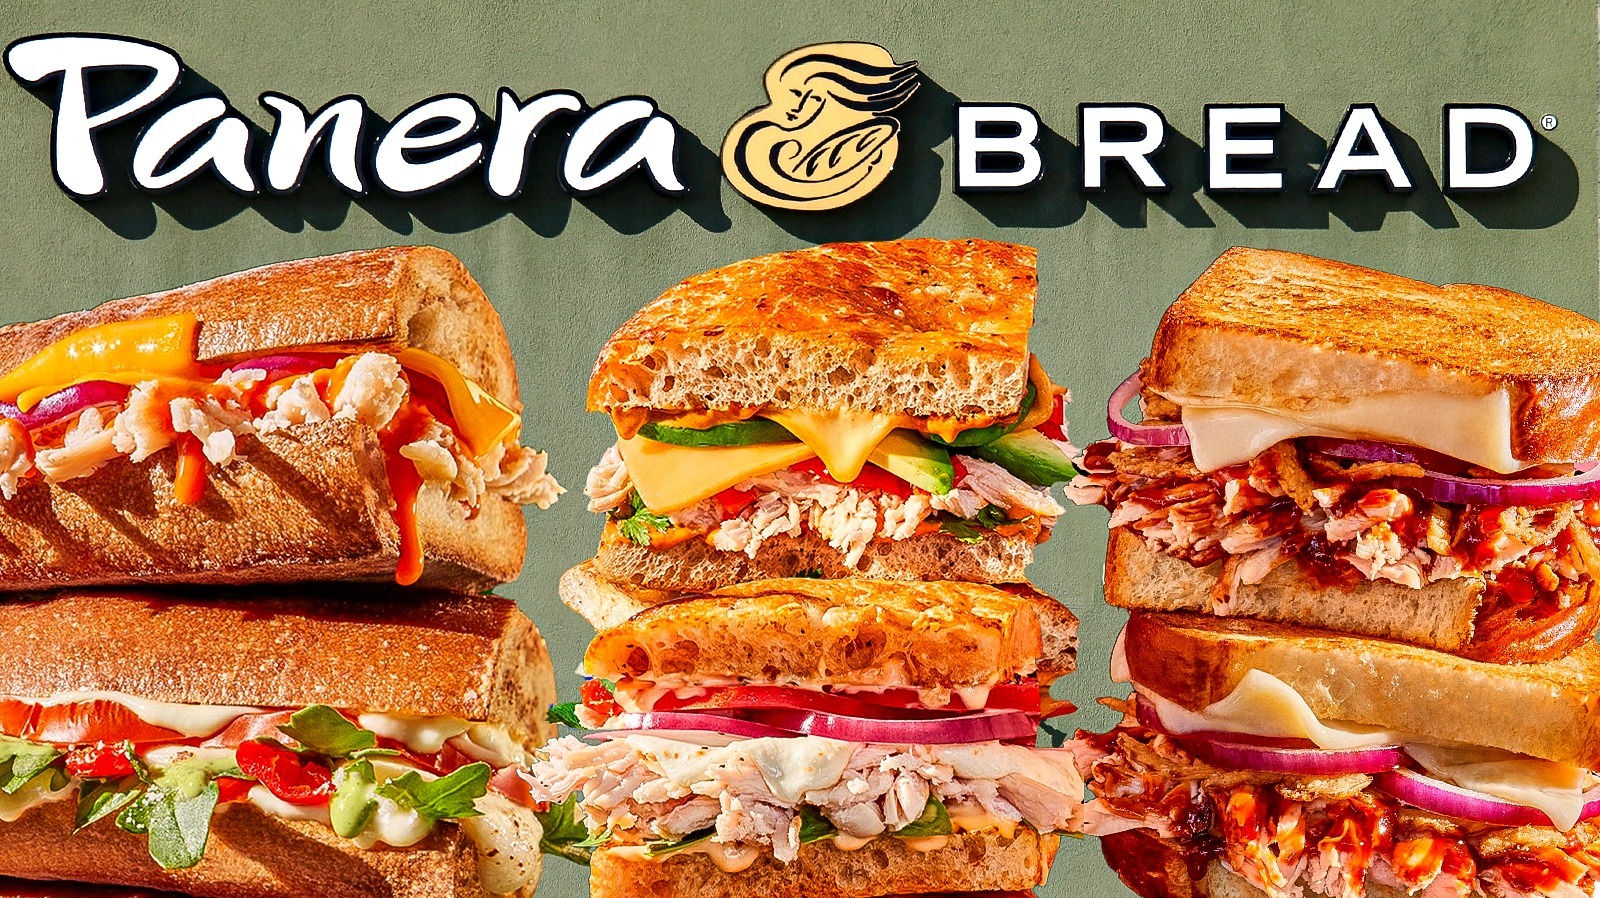 https://www.thedailymeal.com/img/gallery/16-panera-bread-sandwiches-ranked-worst-to-first/l-intro-1686153371.jpg